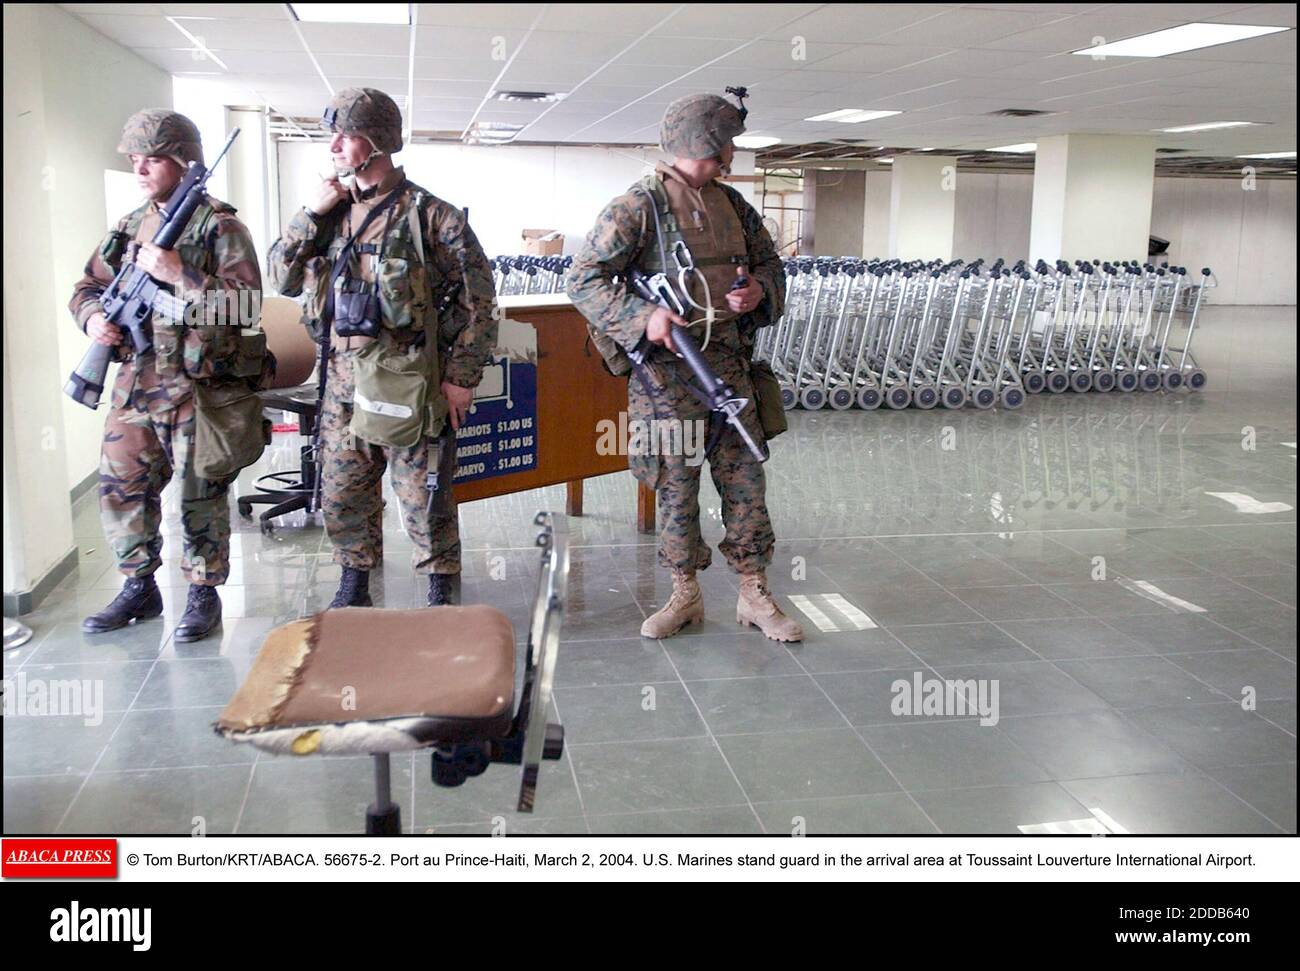 NO FILM, NO VIDEO, NO TV, NO DOCUMENTARY - © Tom Burton/KRT/ABACA. 56675-2. Port au Prince-Haiti, March 2, 2004. U.S. Marines stand guard in the arrival area at Toussaint Louverture International Airport in Port-Au-Prince, Haiti, on Tuesday, March 2, 2004. (mvw) 2004 Stock Photo